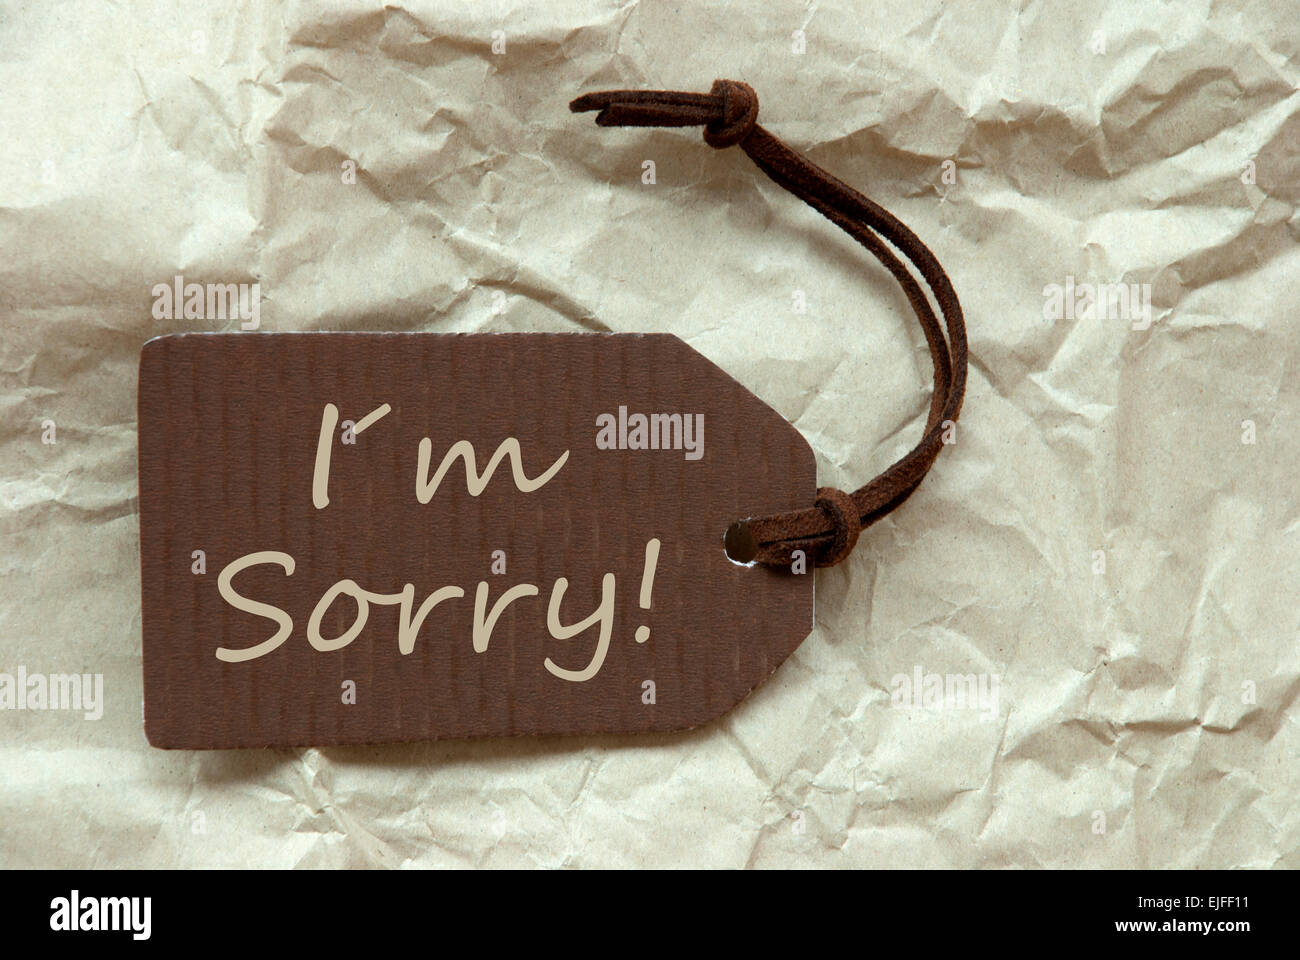 One Brown Label Or Tag With Brown Ribbon On Crumpled Paper Background With English Text I Am Sorry Vintage Or Retro Style Stock Photo